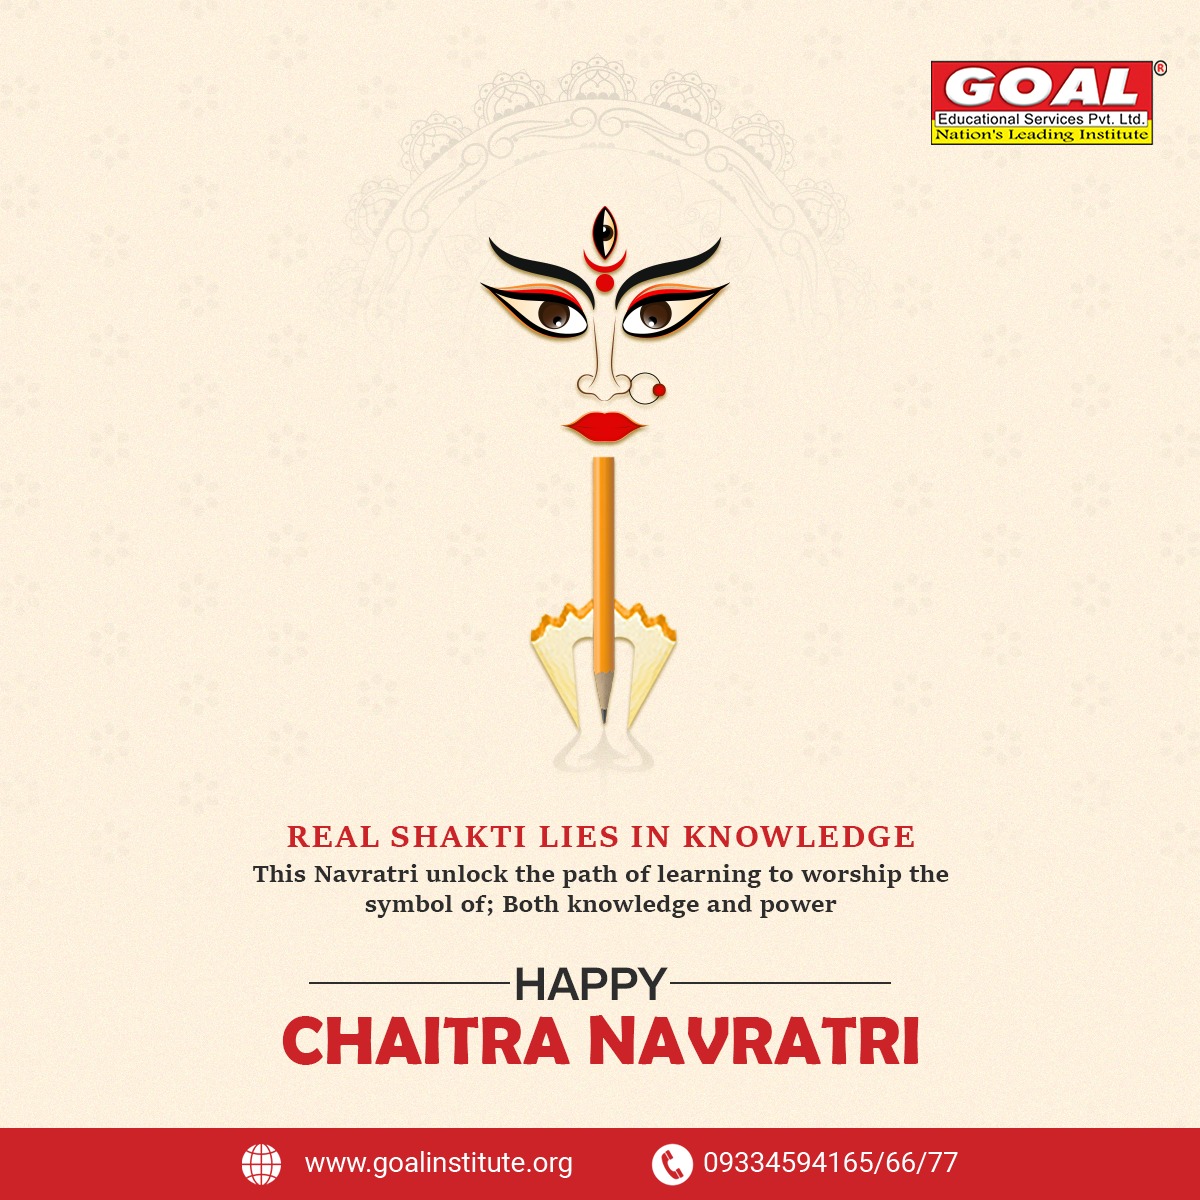 May Goddess Durga bless all with Knowledge, Success & Prosperity on the auspicious occasion of Navratri! 
GOAL Institute wishes you a Happy Chaitra Navratri.
.
.
#HappyChaitraNavratri #maadurga #festivevibes #festivalofdevinepowerofgodess